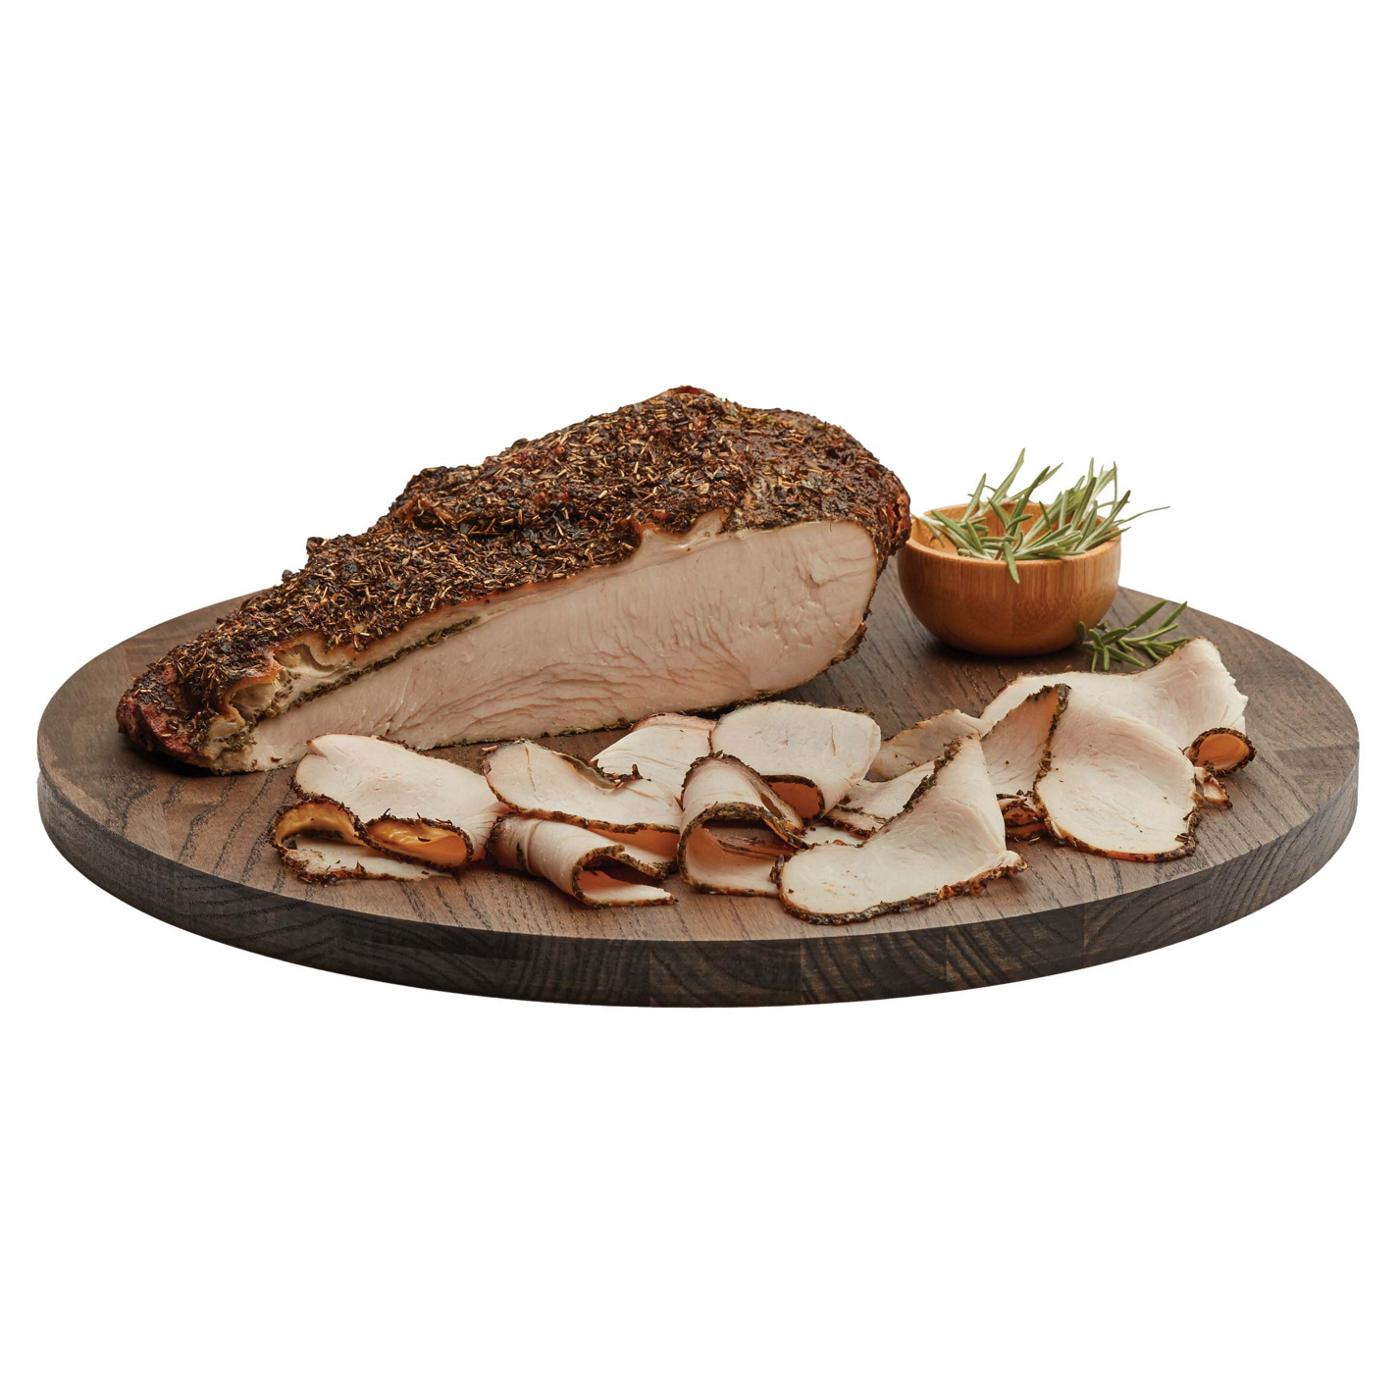 H-E-B Natural Sliced In-House Roasted Herb-Encrusted Turkey Breast; image 1 of 2